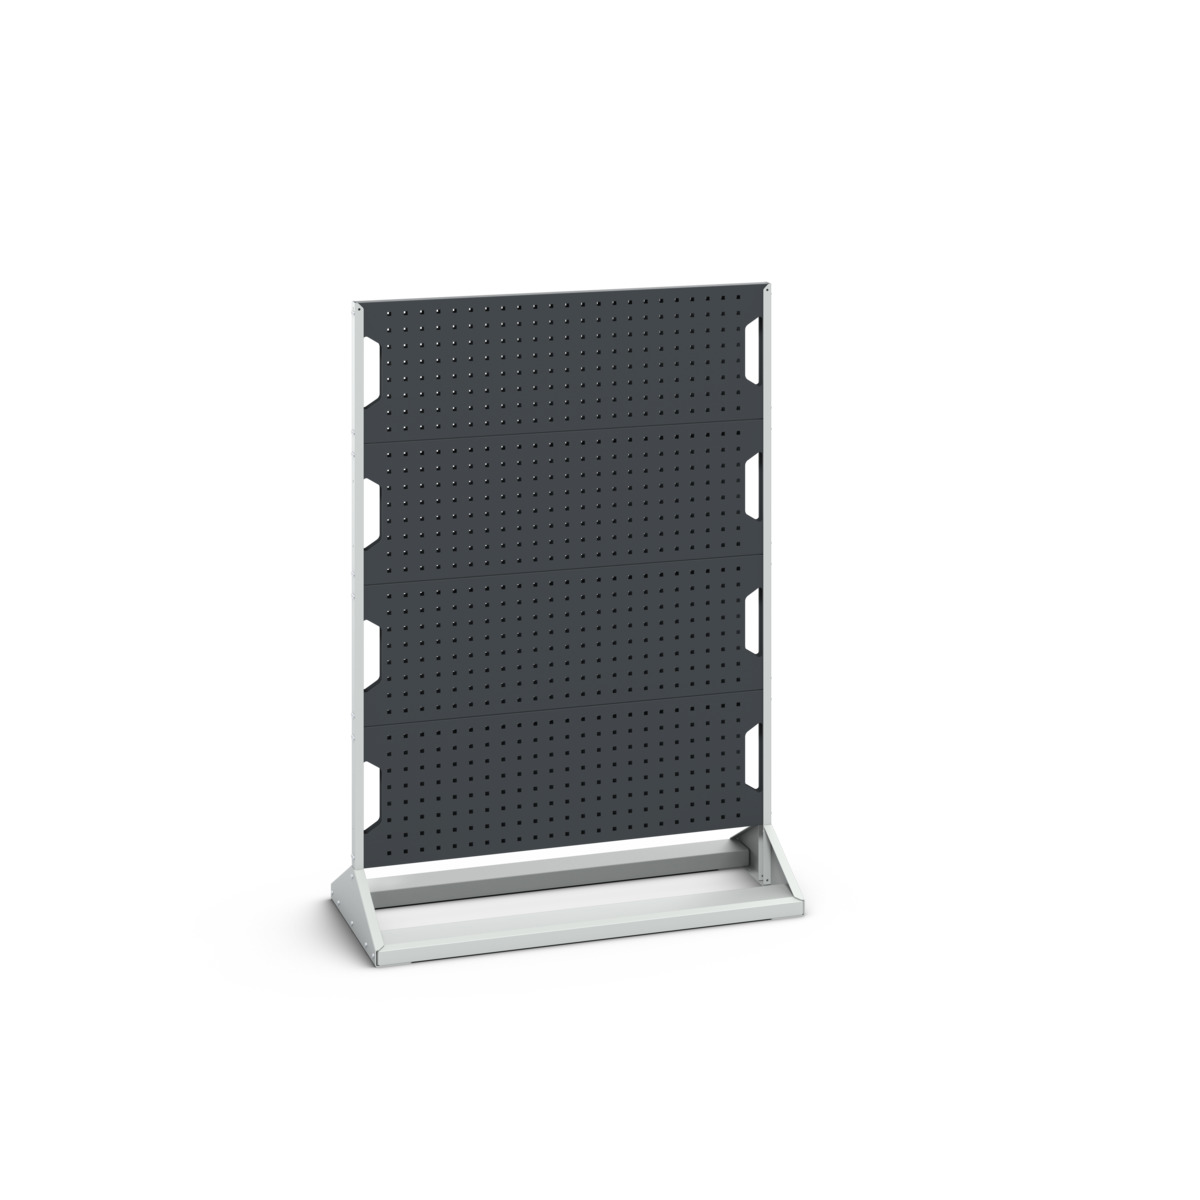 16917101. - perfo panel rack double sided